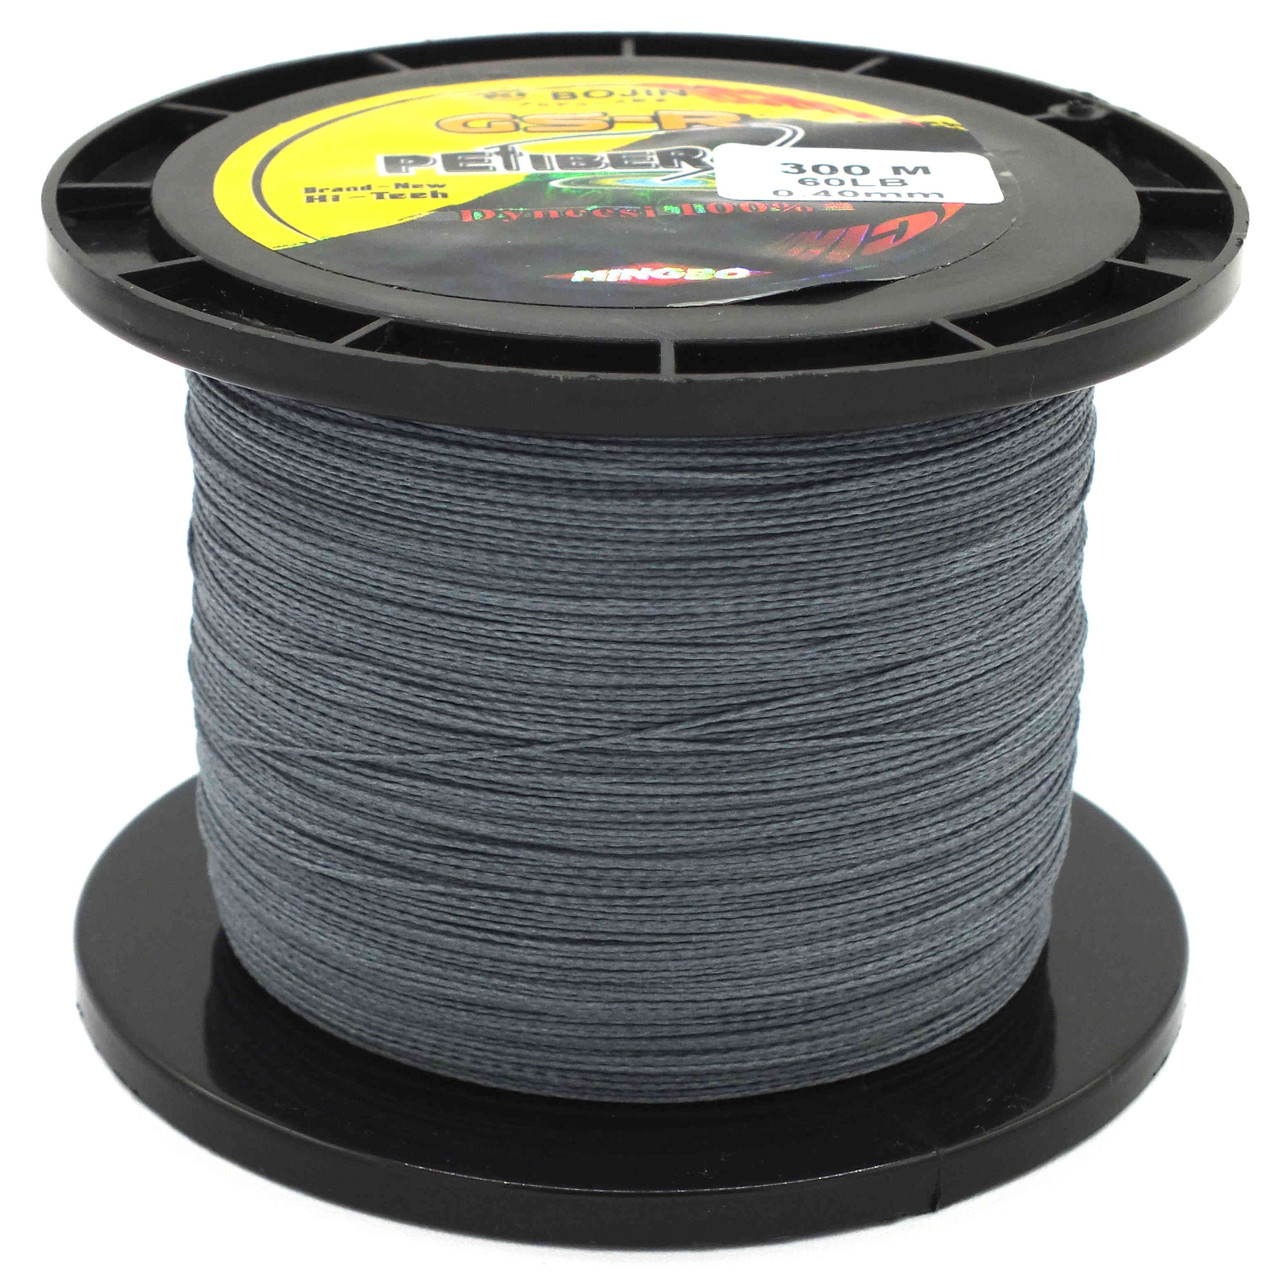 Gray Leoie Strong Professional 300m/328yds 4 Braid Single Color Fishing Line 